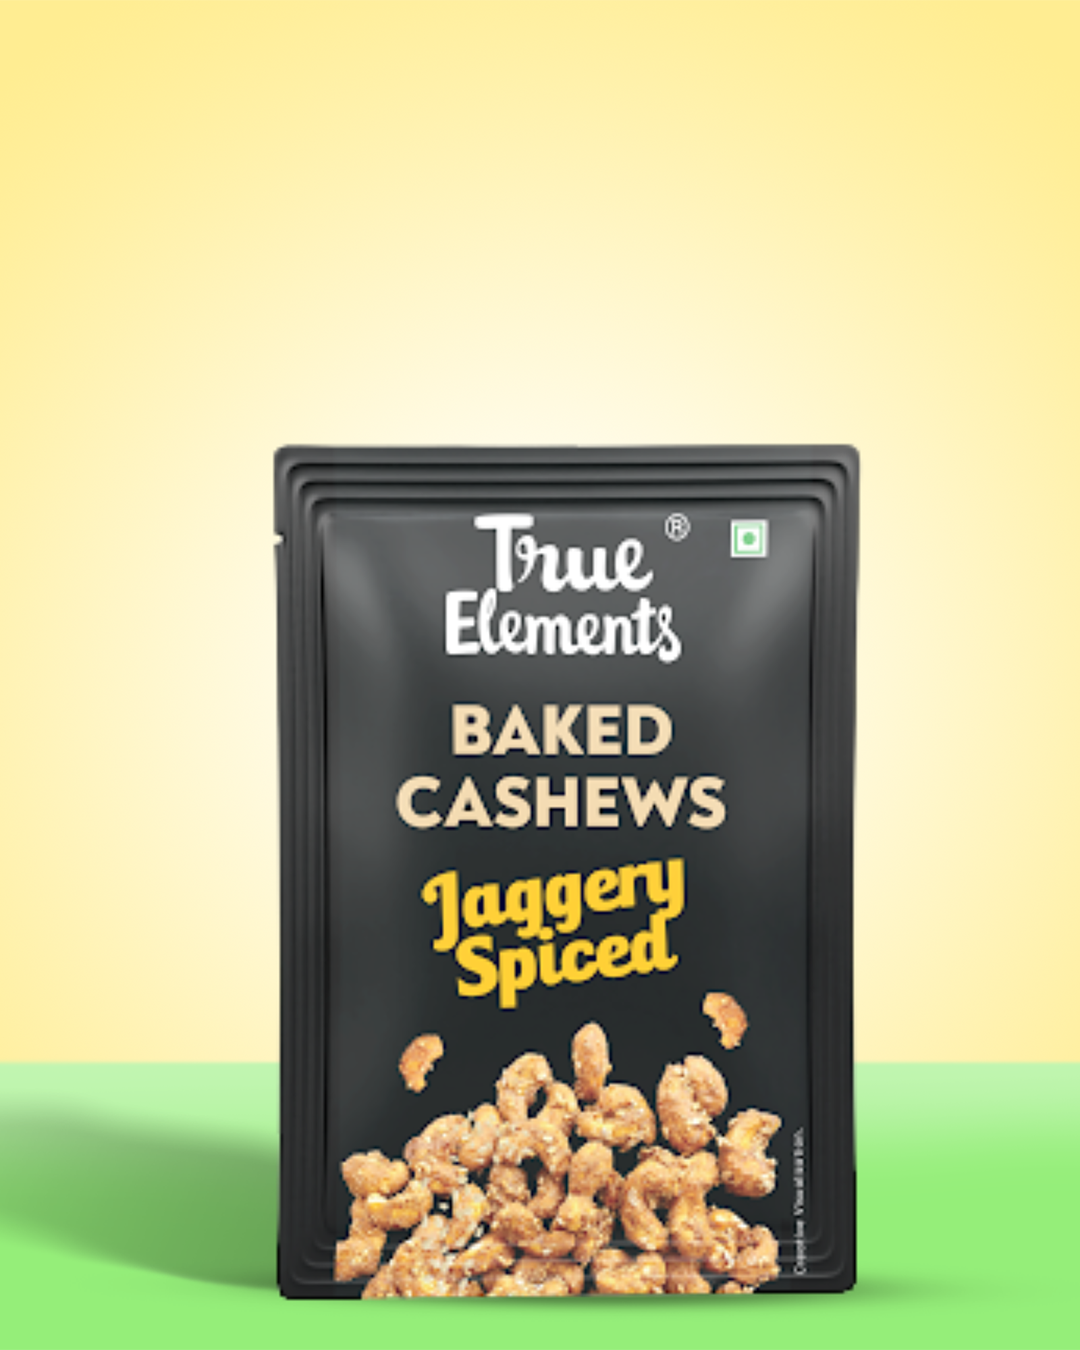 True Elements Baked Cashews Jaggery Spiced 14gm Dry Fruits.